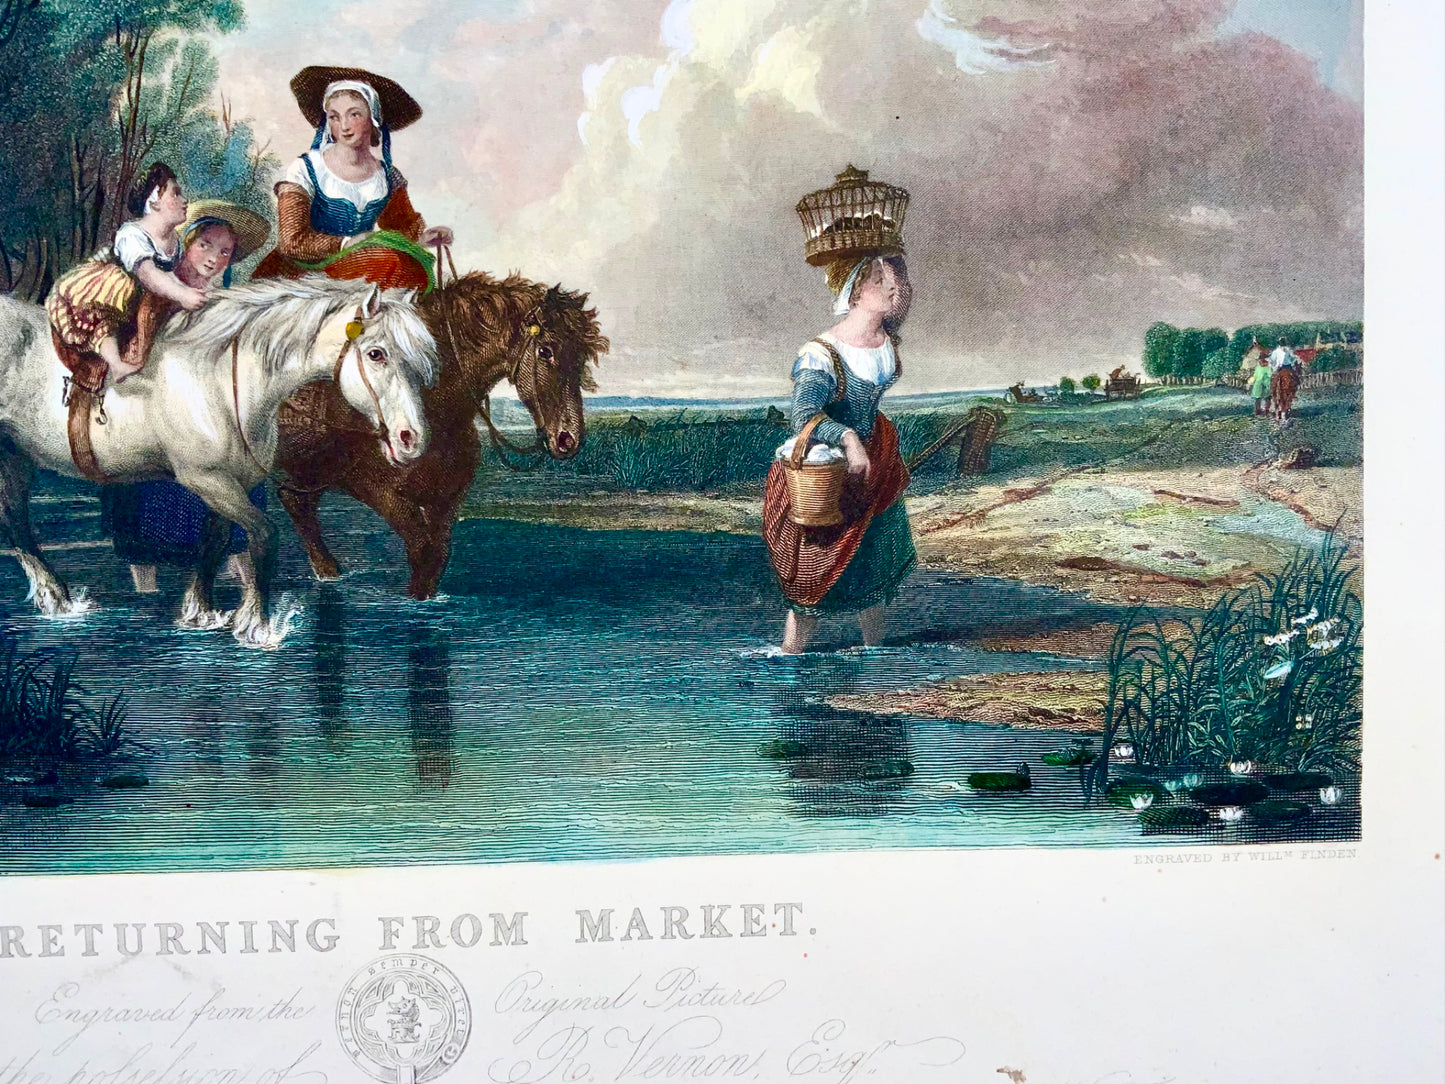 1845 Returning from Market, A.W. Calcott, very large 55cm coloured engraving, landscape